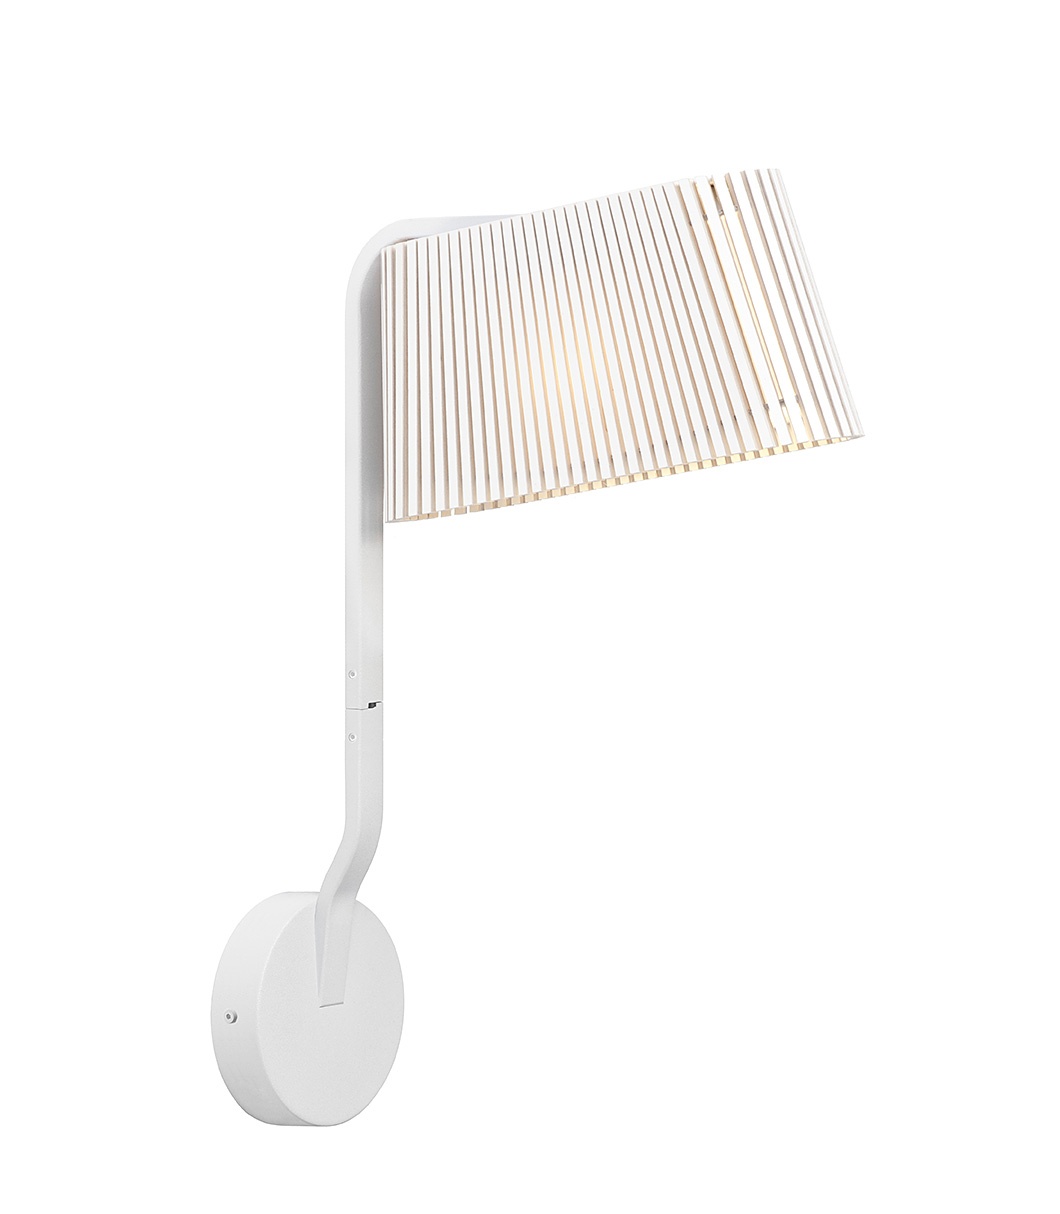 Owalo 7030 wall lamp is available in white laminated